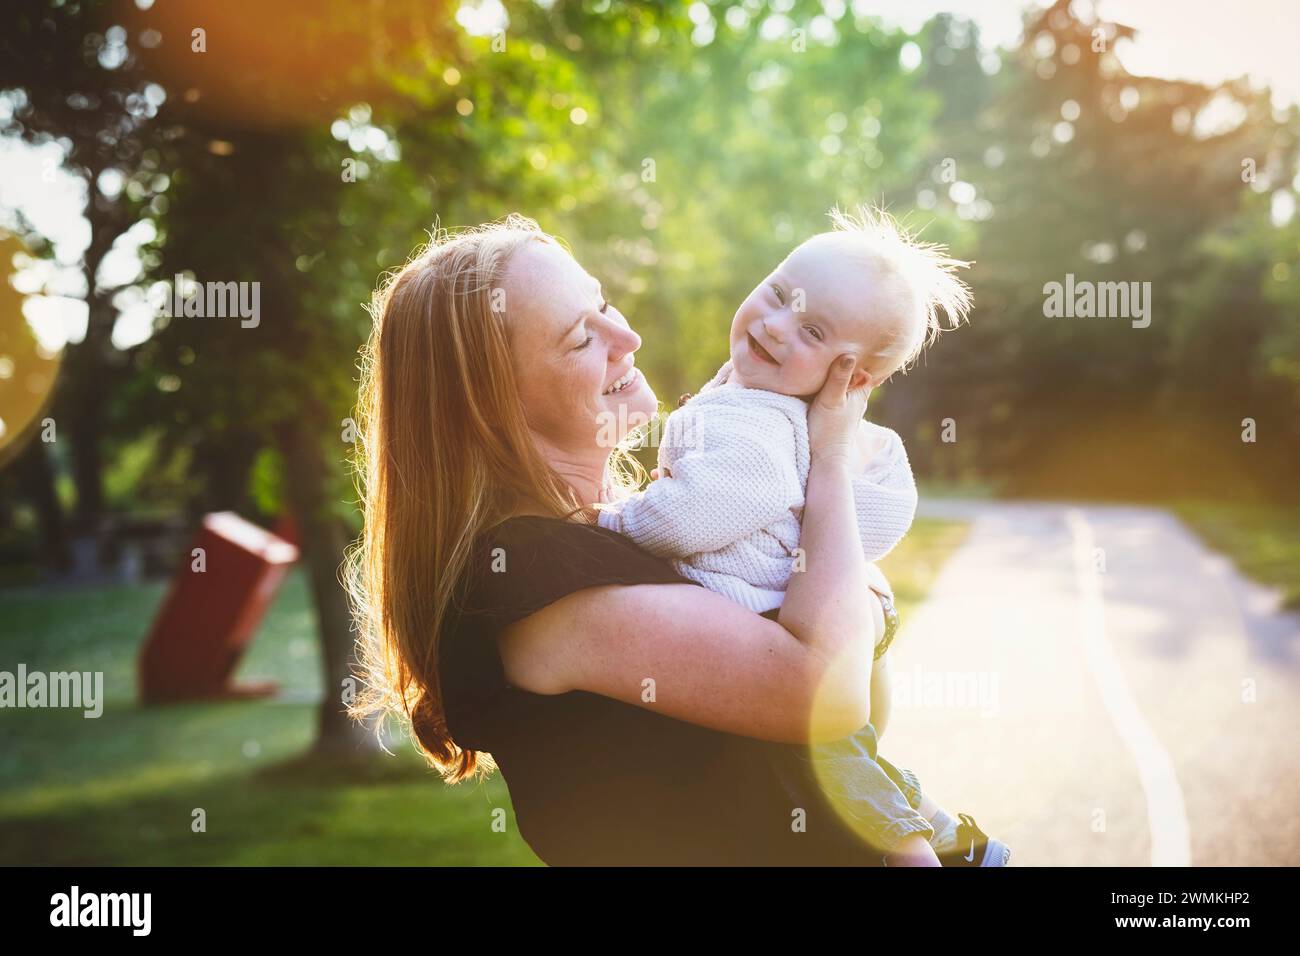 Outdoor portrait of a mother spending quality time with her son who has Down Syndrome in a city park during an bright sunny autumn day Stock Photo